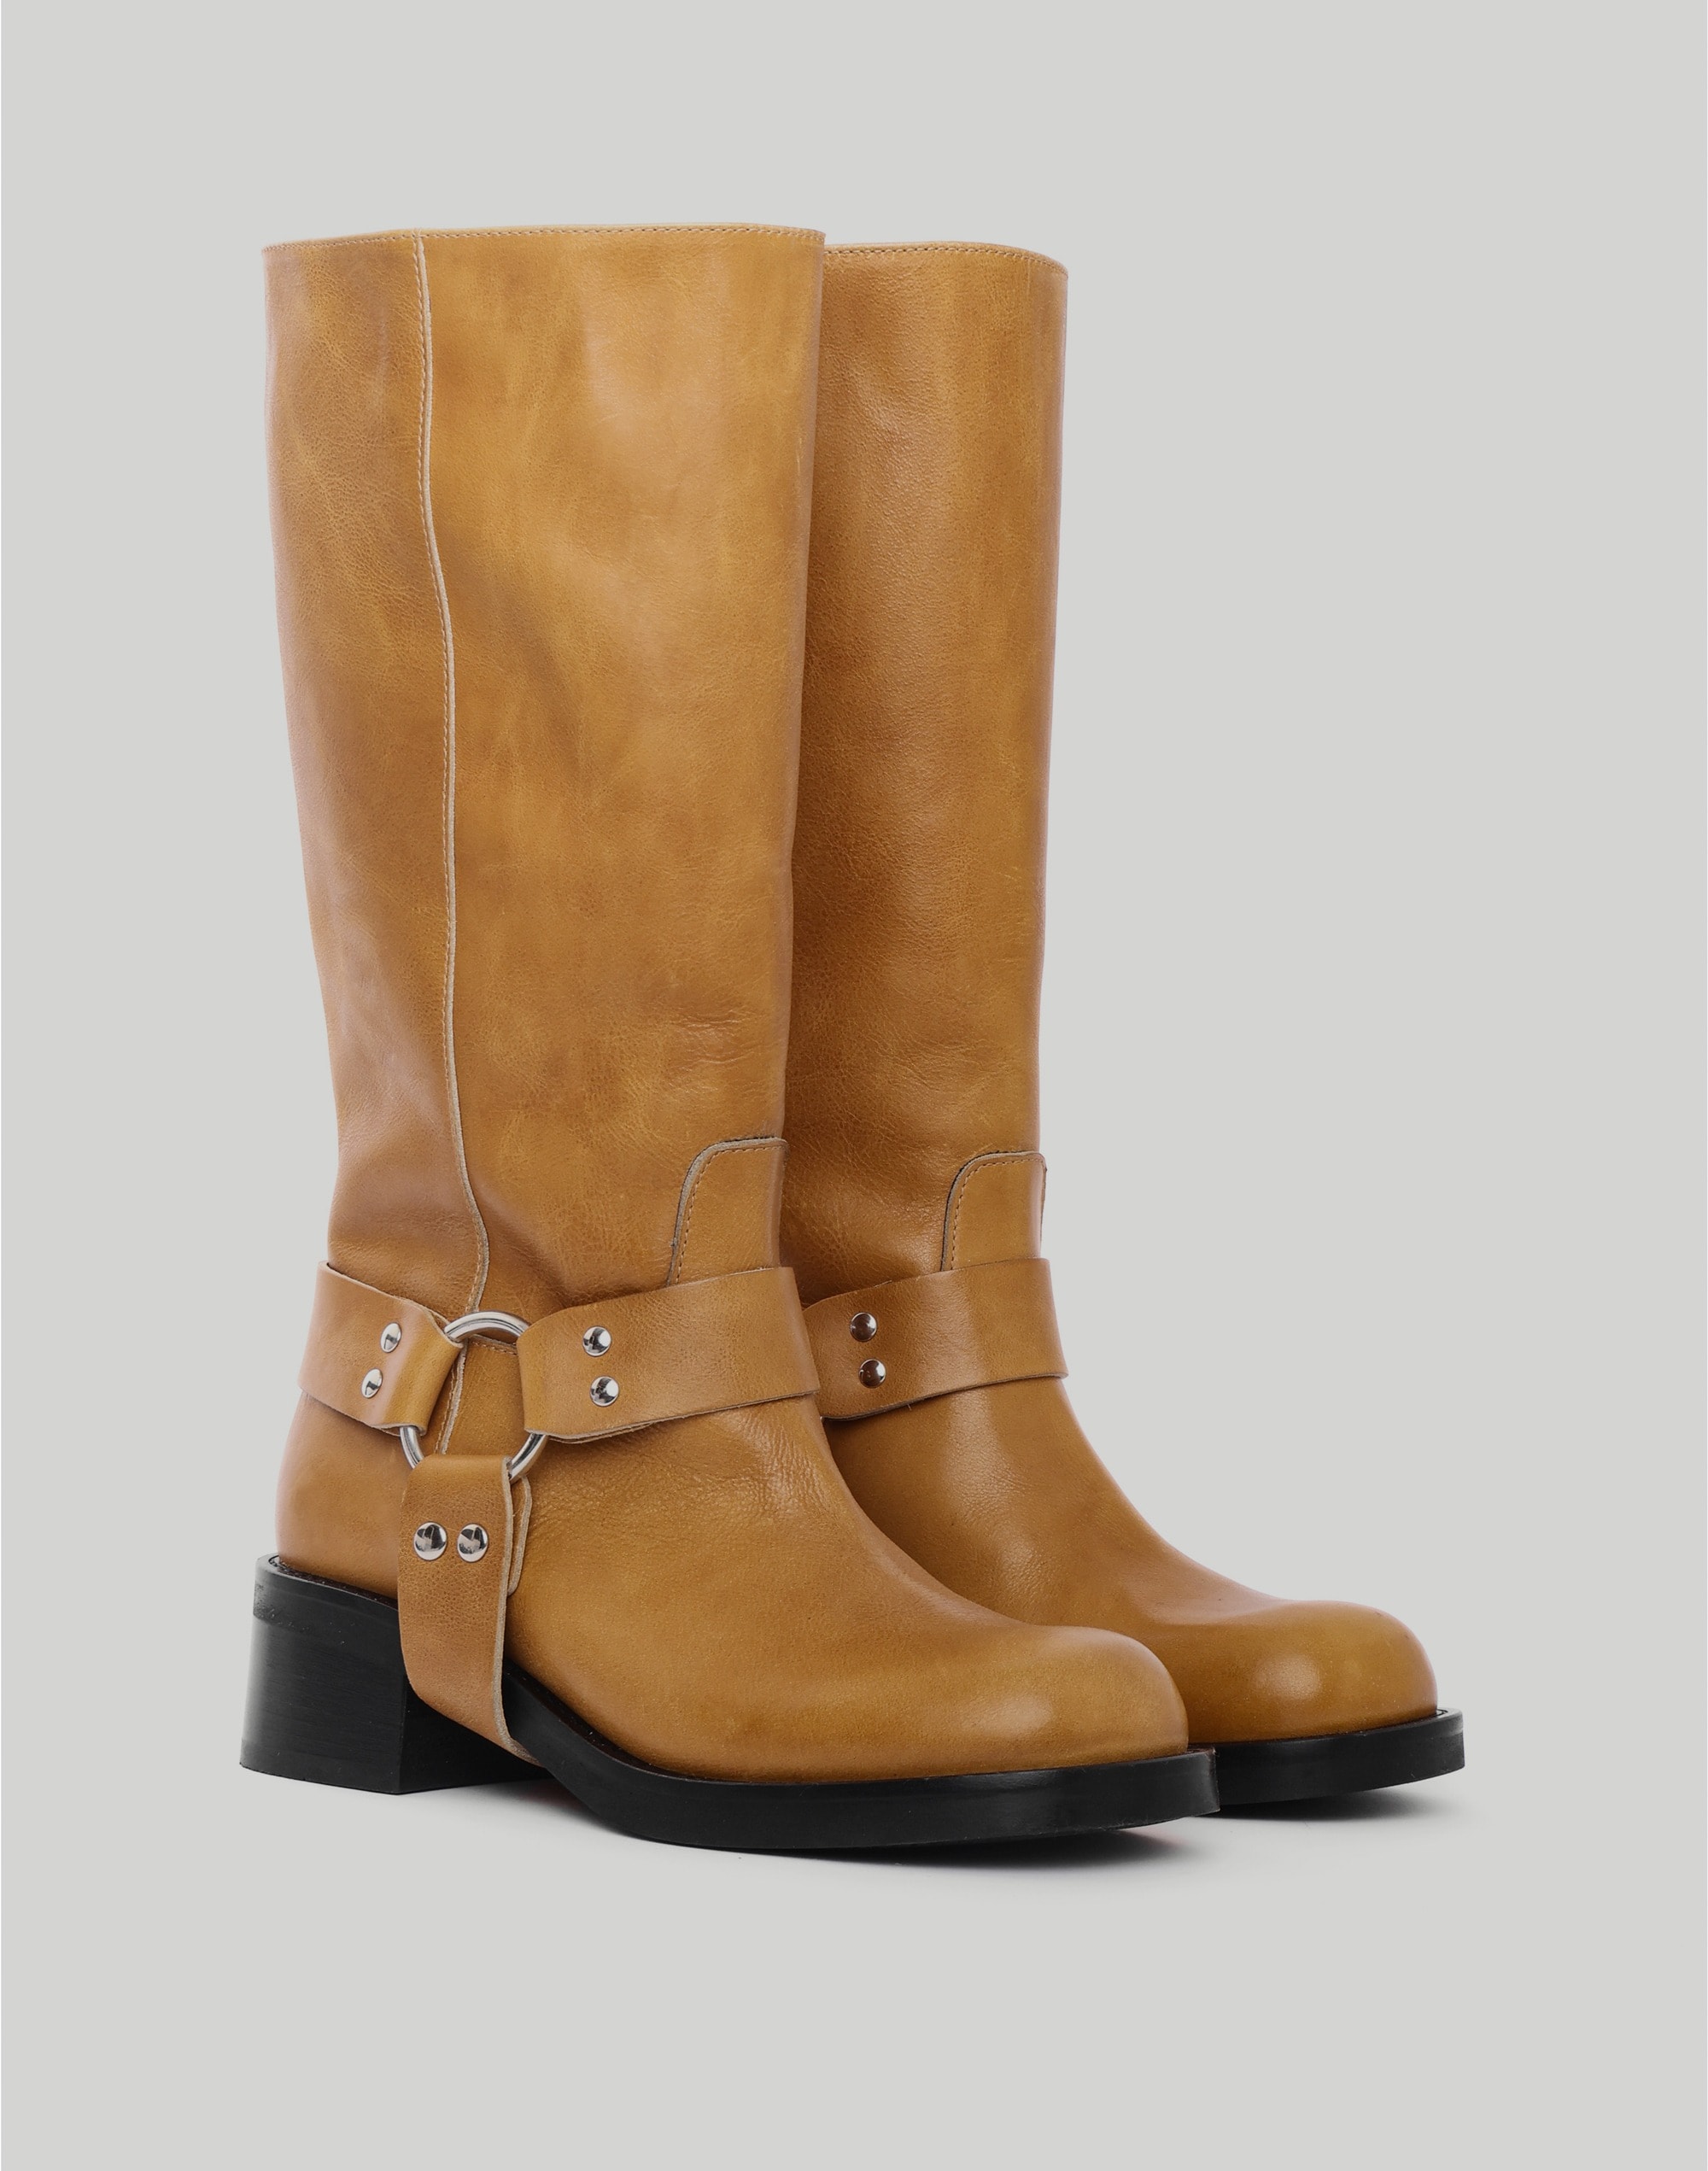 Maguire Lucca Dijon Boot